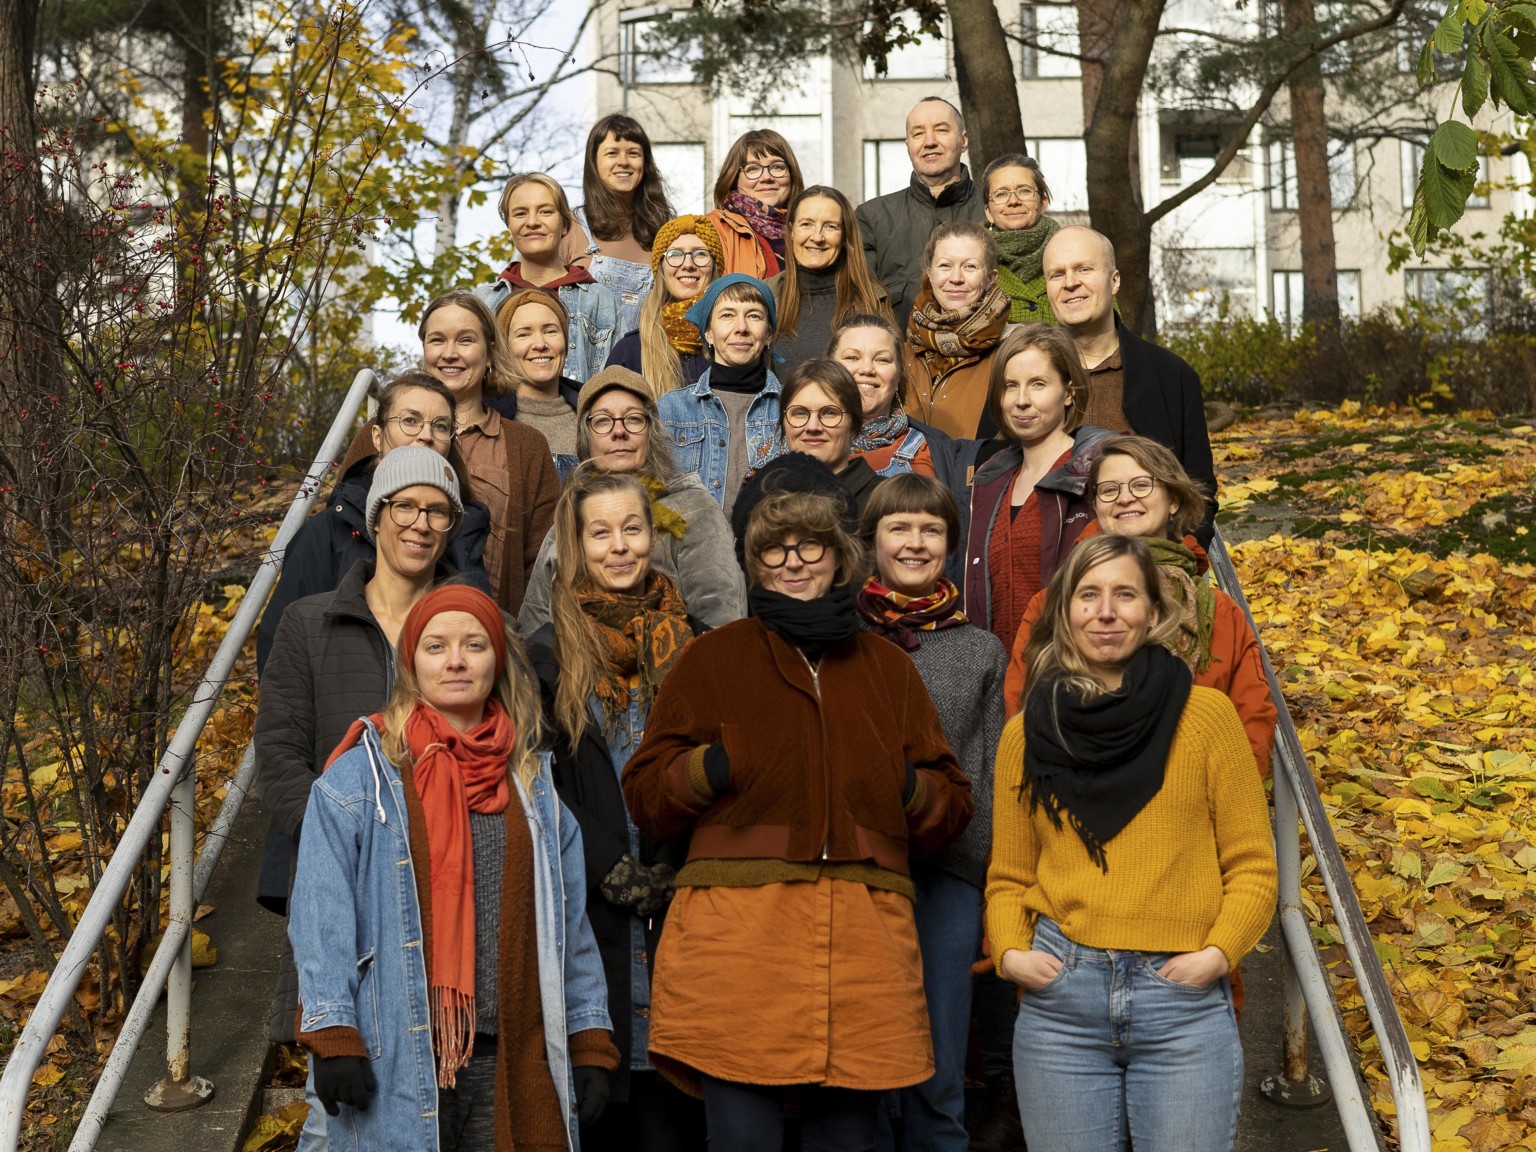 Members of Väki choir standing on the steps, surrounded by autumn nature.